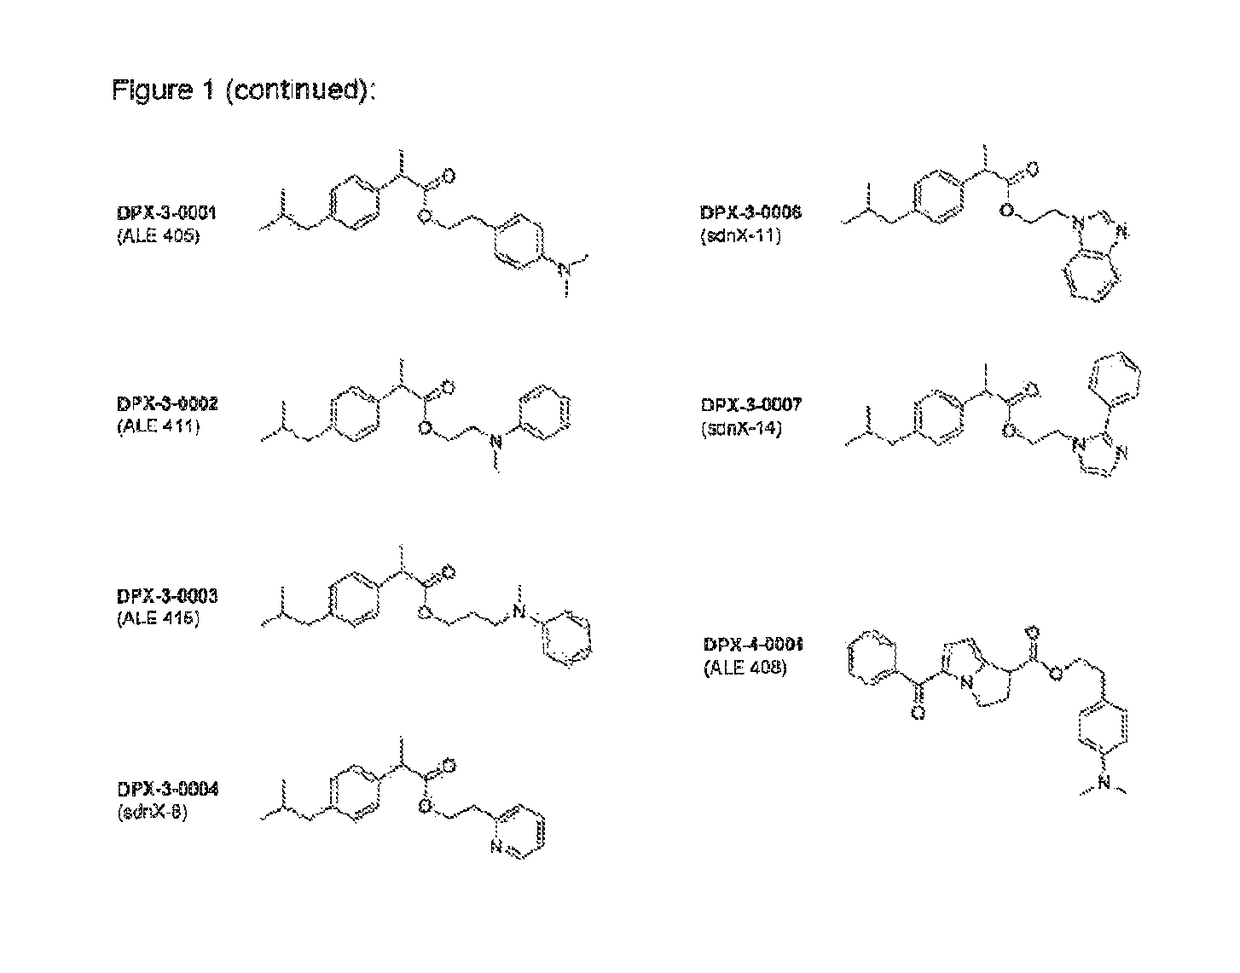 Prodrugs of non-steroid anti-inflammatory agents (NSAIDS)